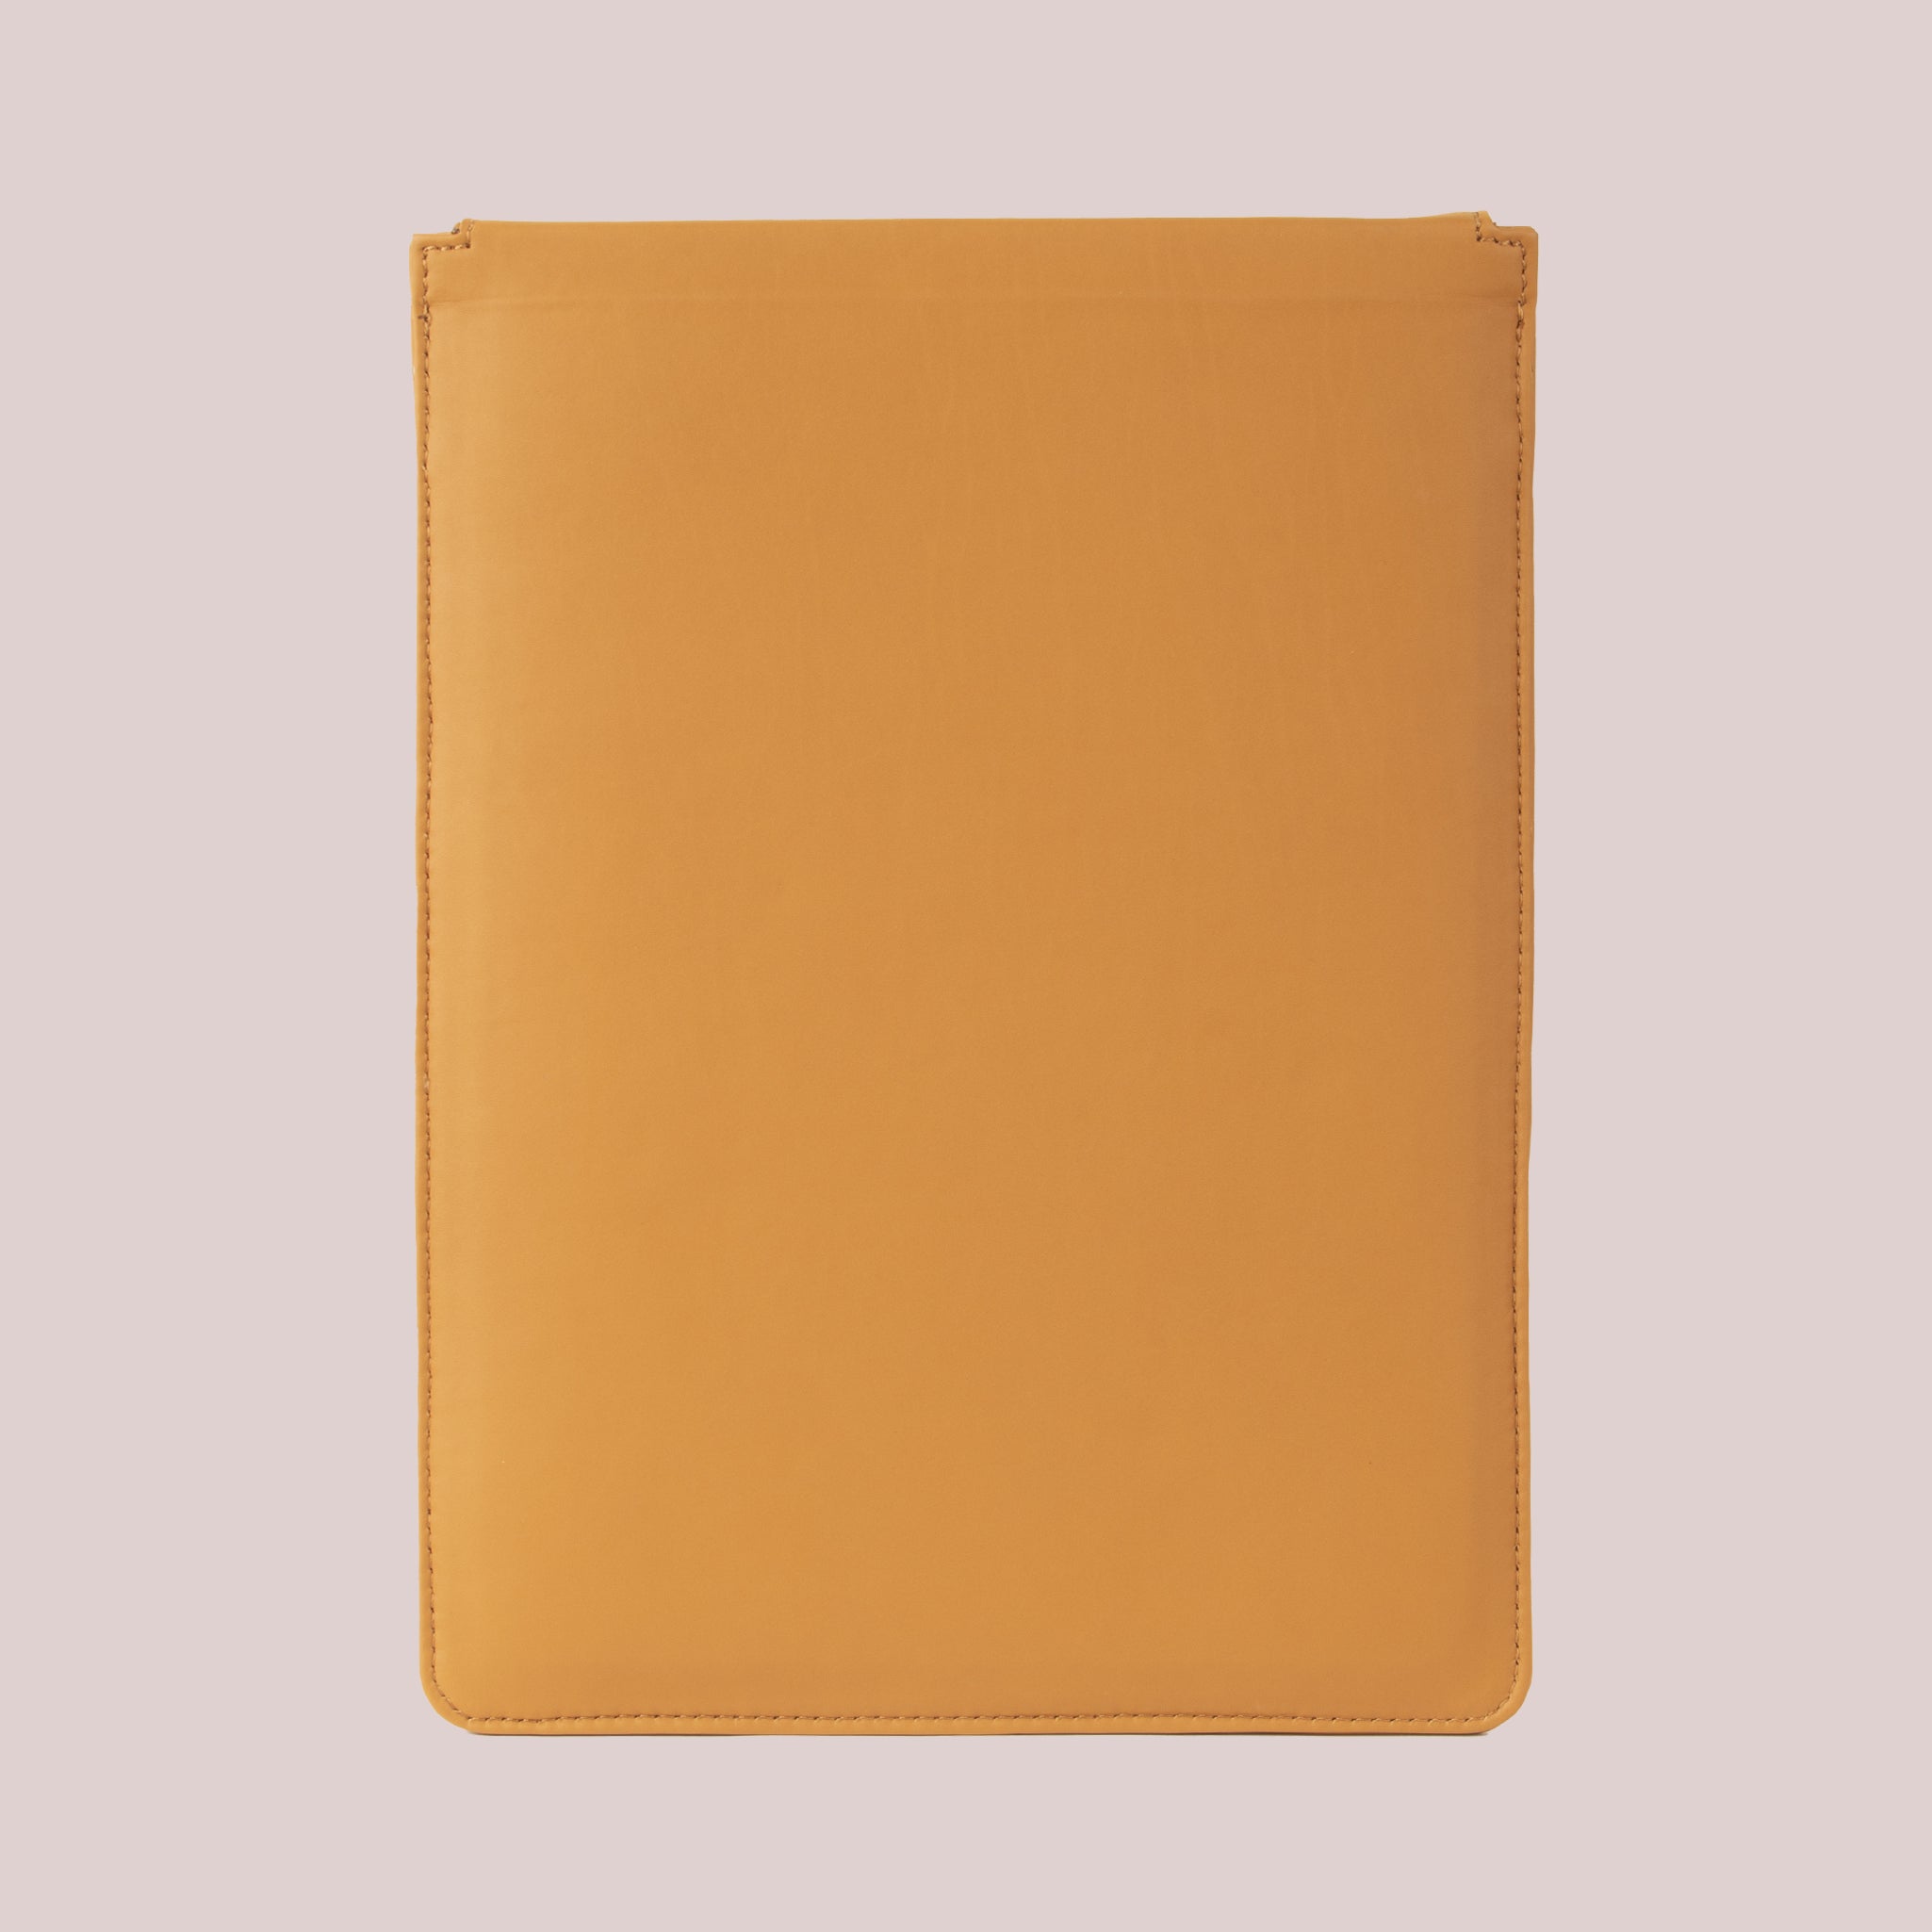 Buy online Yellow leather sleeve for Macbook laptops, with a flap